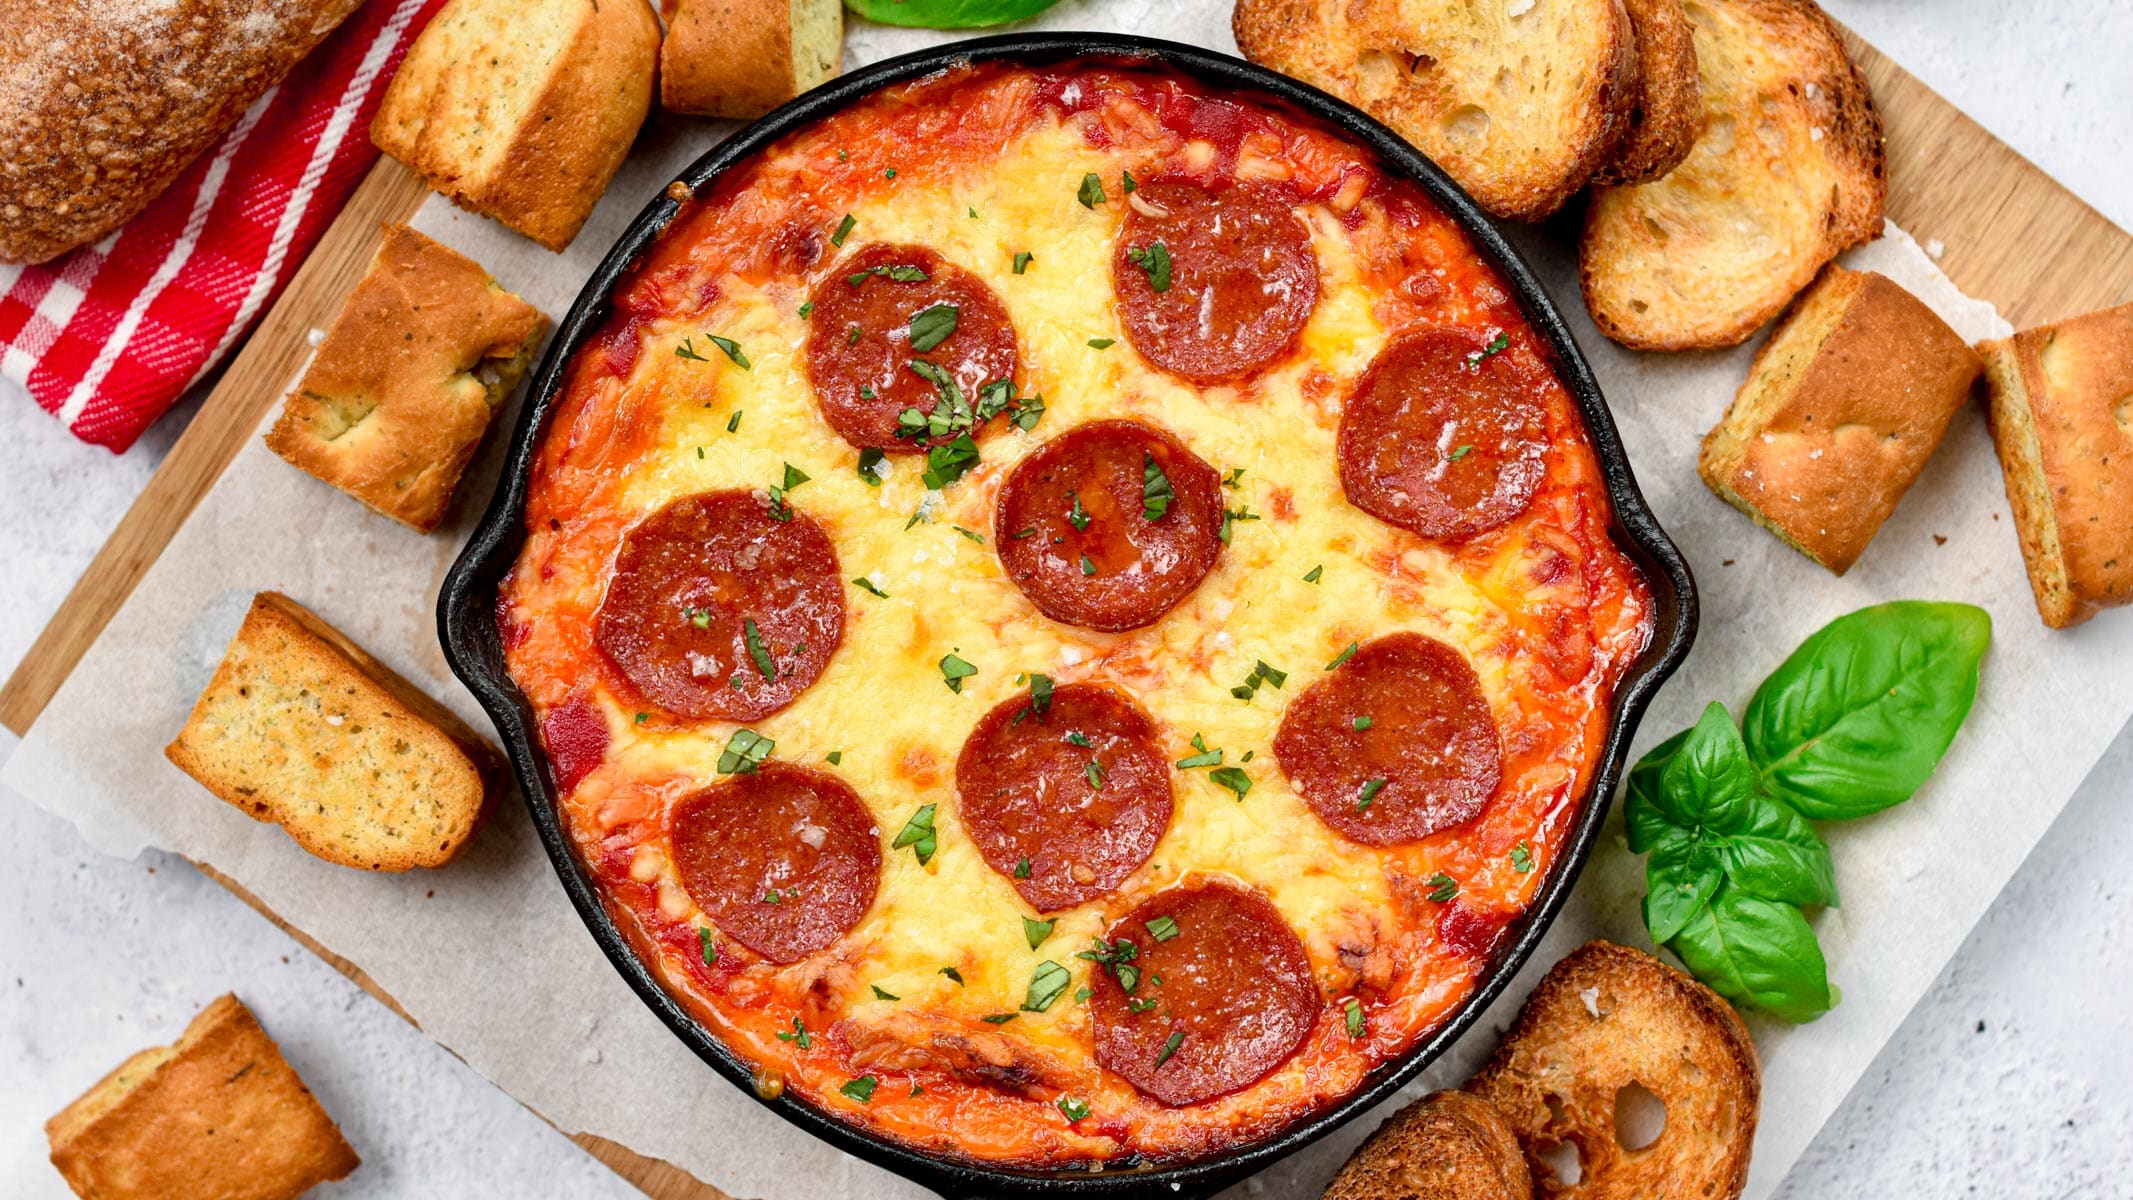 Keto Pizza Dip in a large skillet, surrounded by low-carb bread slices.